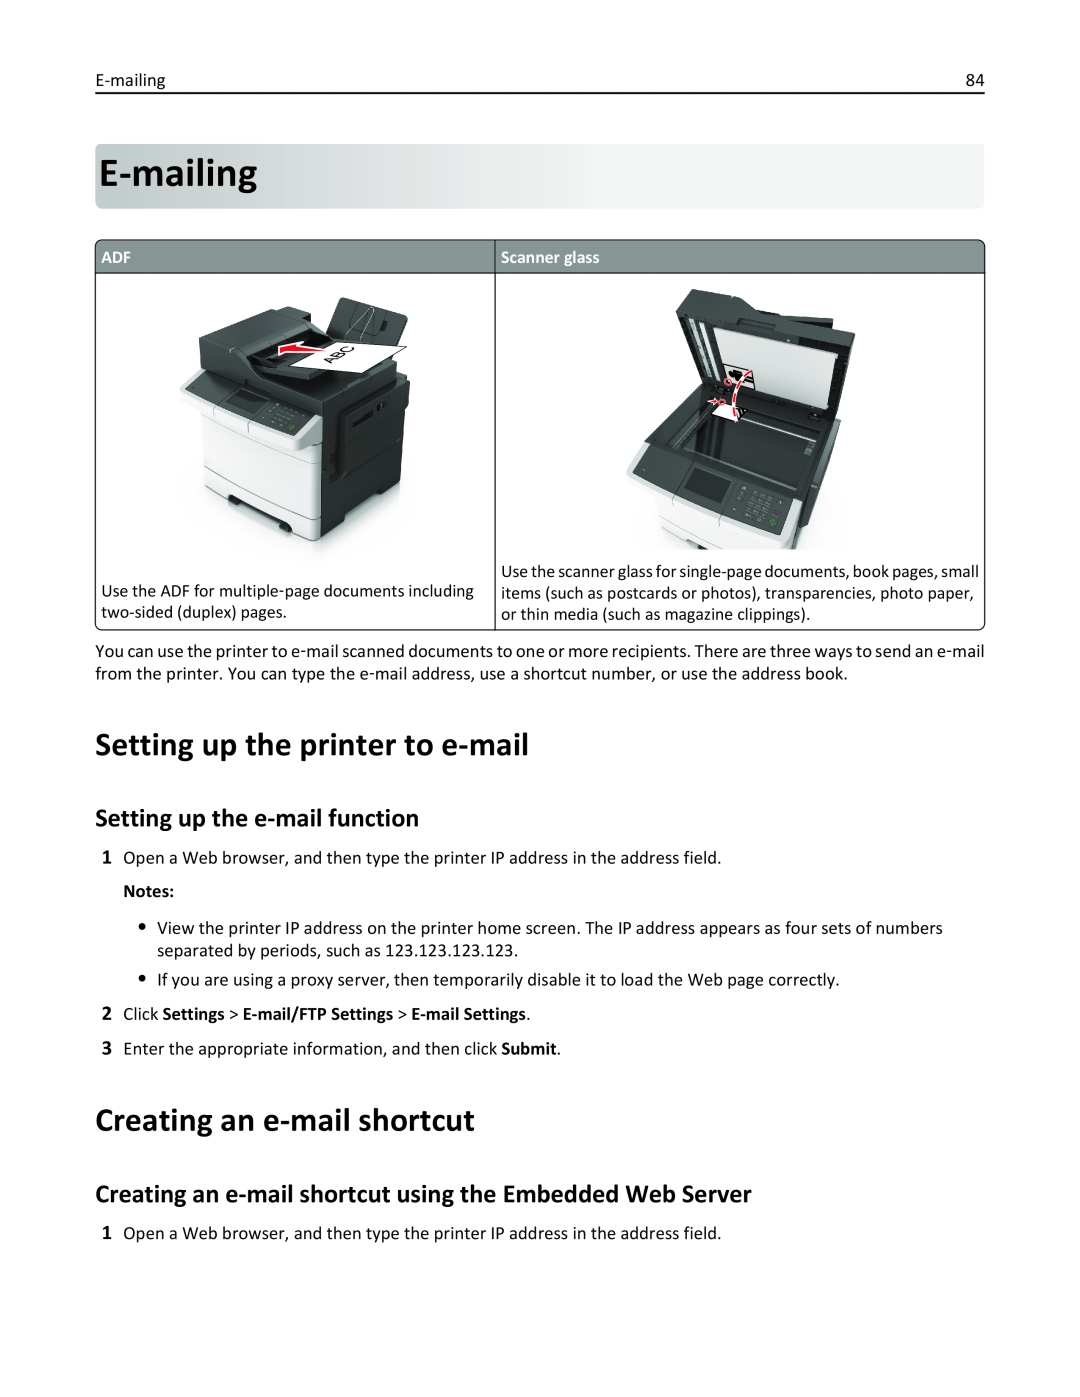 Lexmark 436 manual E-mailing, Setting up the printer to e-mail, Creating an e-mail shortcut, Setting up the e-mail function 